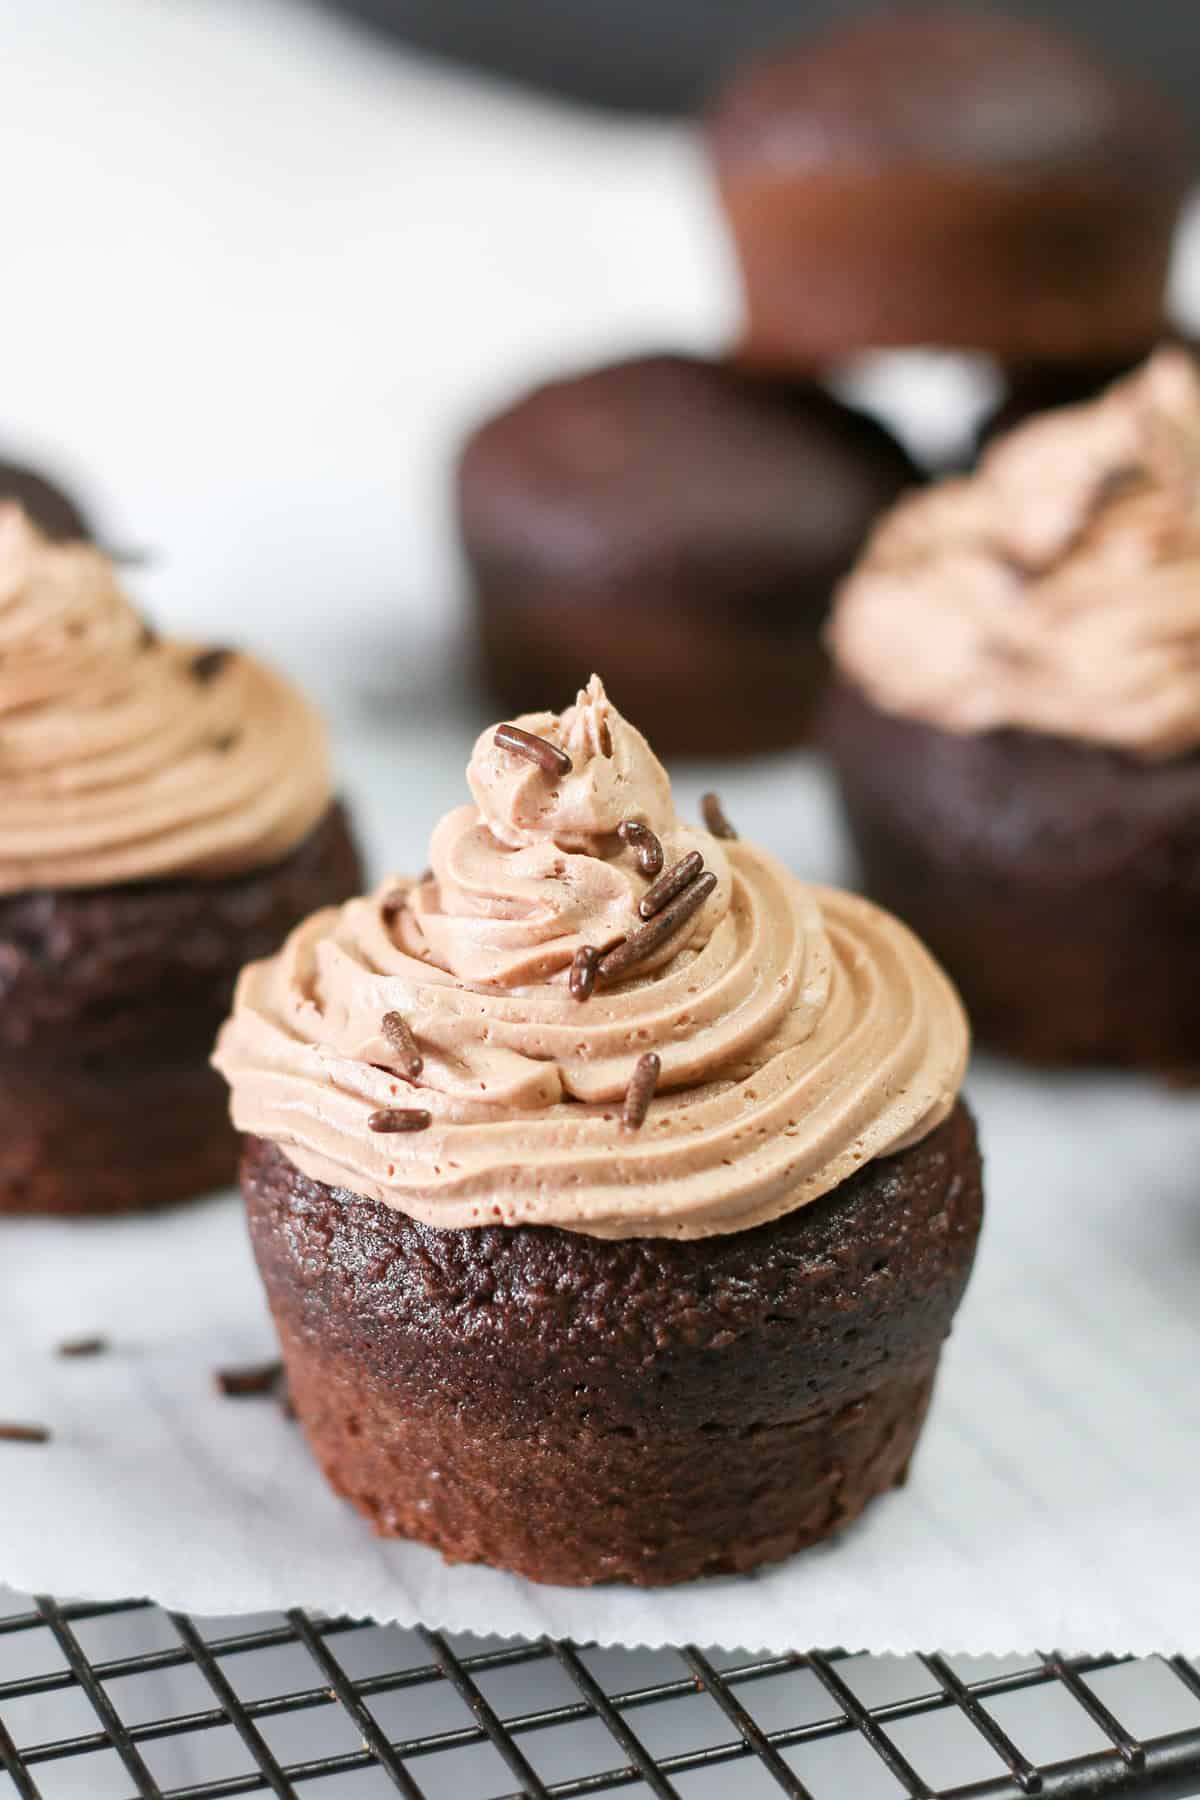 A homemade chocolate cupcake with chocolate buttercream frosting and chocolate sprinkles on a cooling rack.